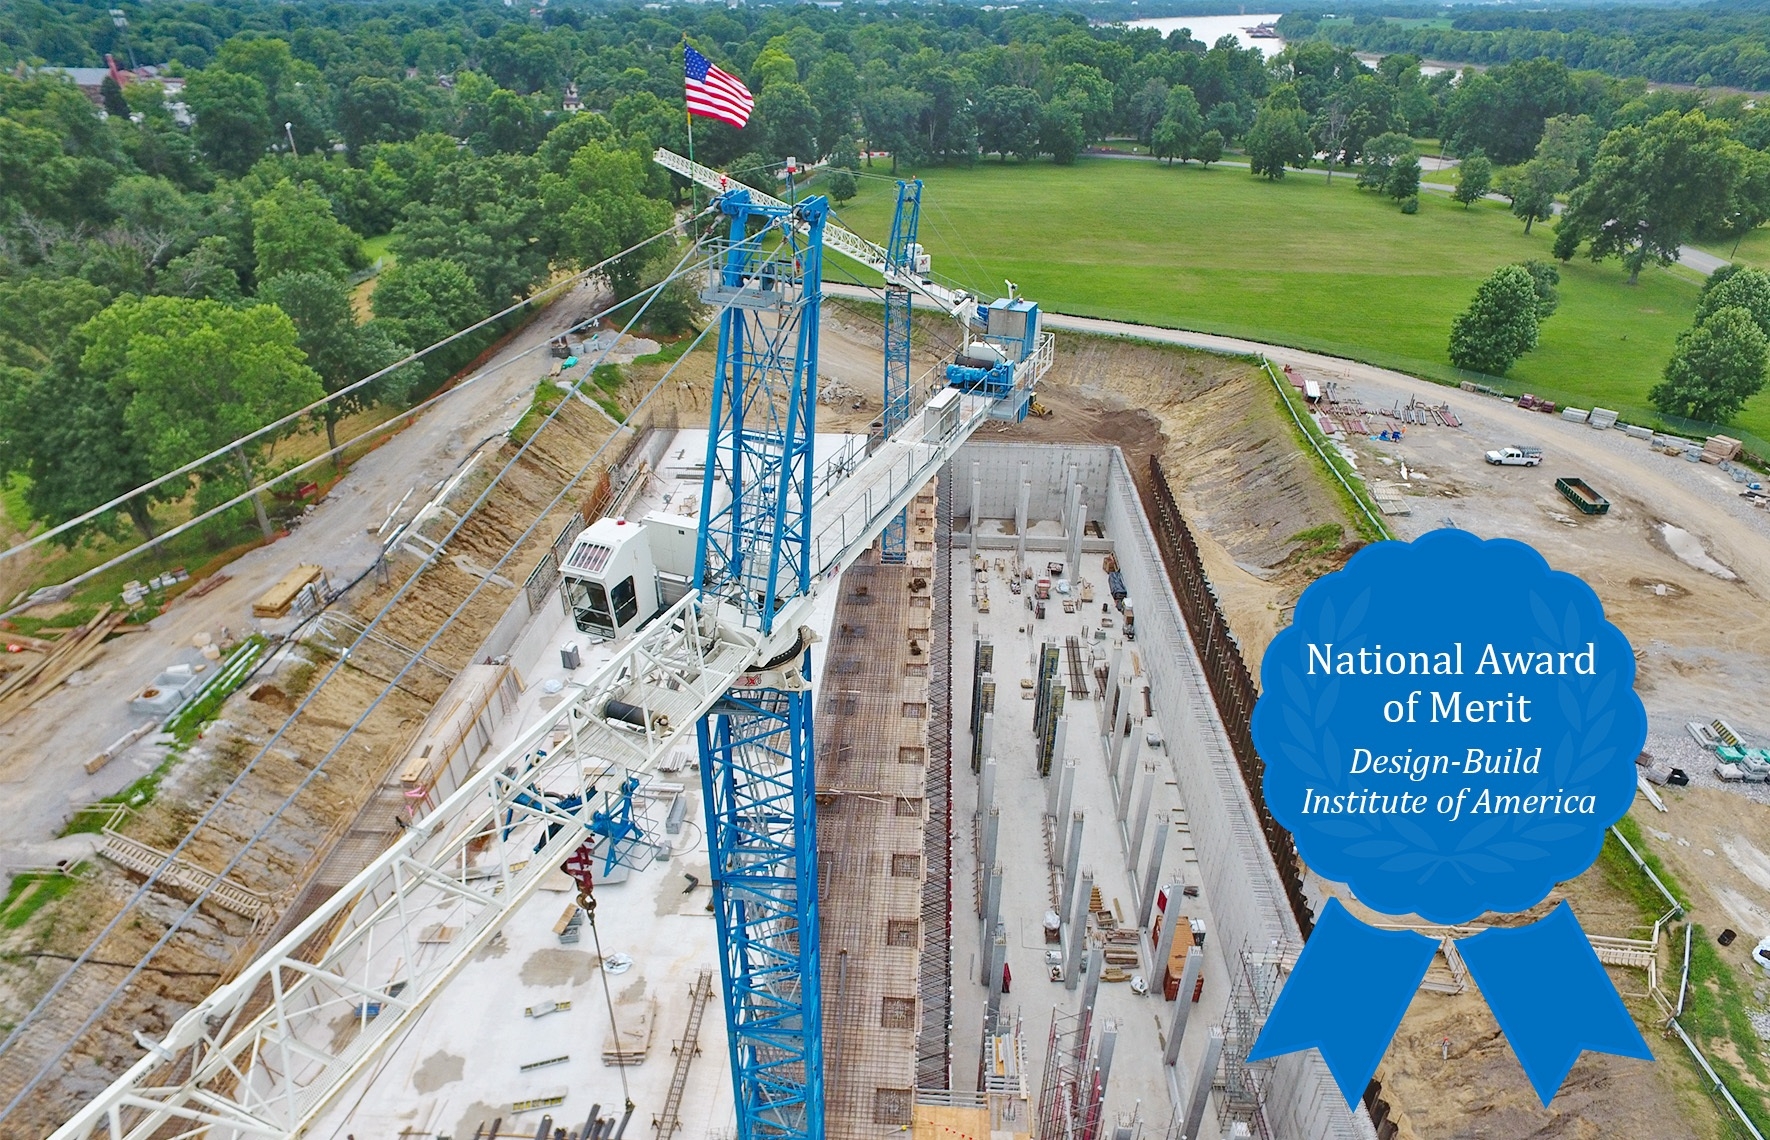 Our Southwestern Parkway CSO Basin Design-Build project received DBIA's highest honor in 2019. This project helped prevent CSO events through the construction of a 20-million gallon concrete storage basin buried under a historic public park.